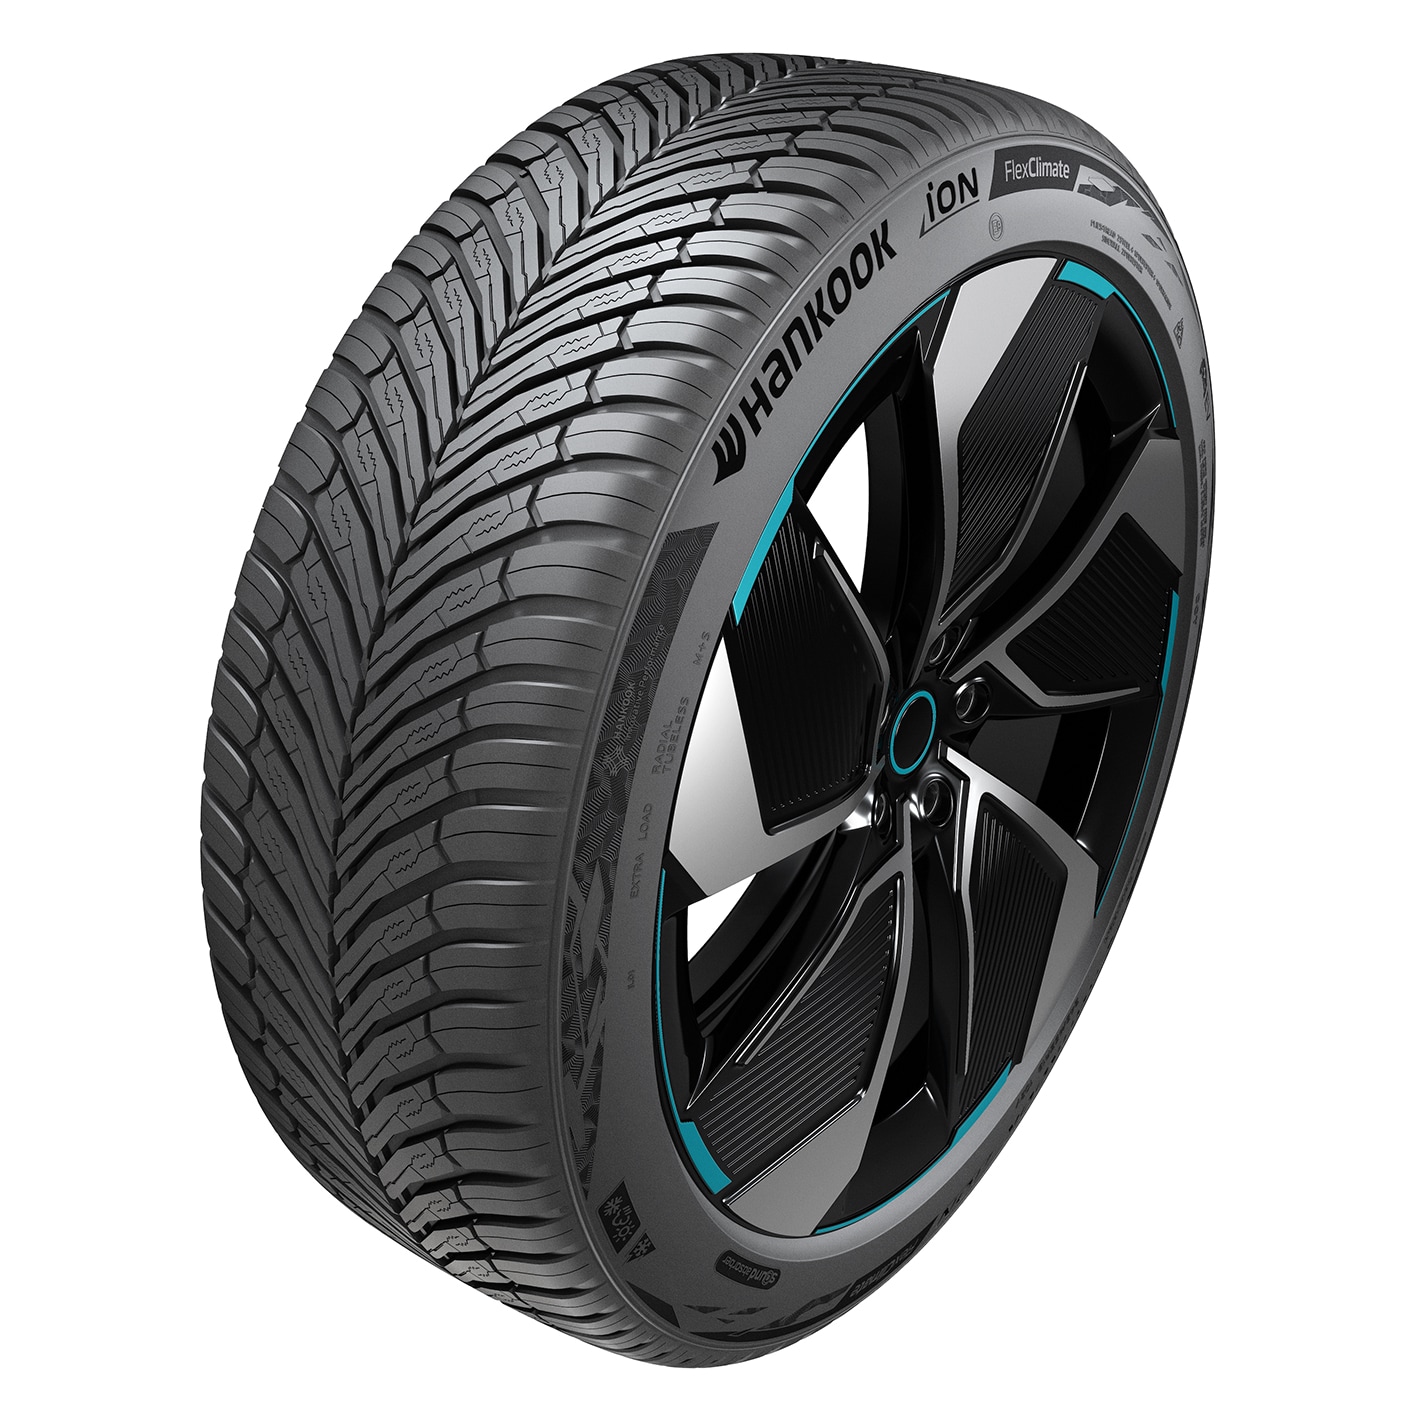 iON FlexClimate – Hankook Tire presents new all-season tire for electric vehicles